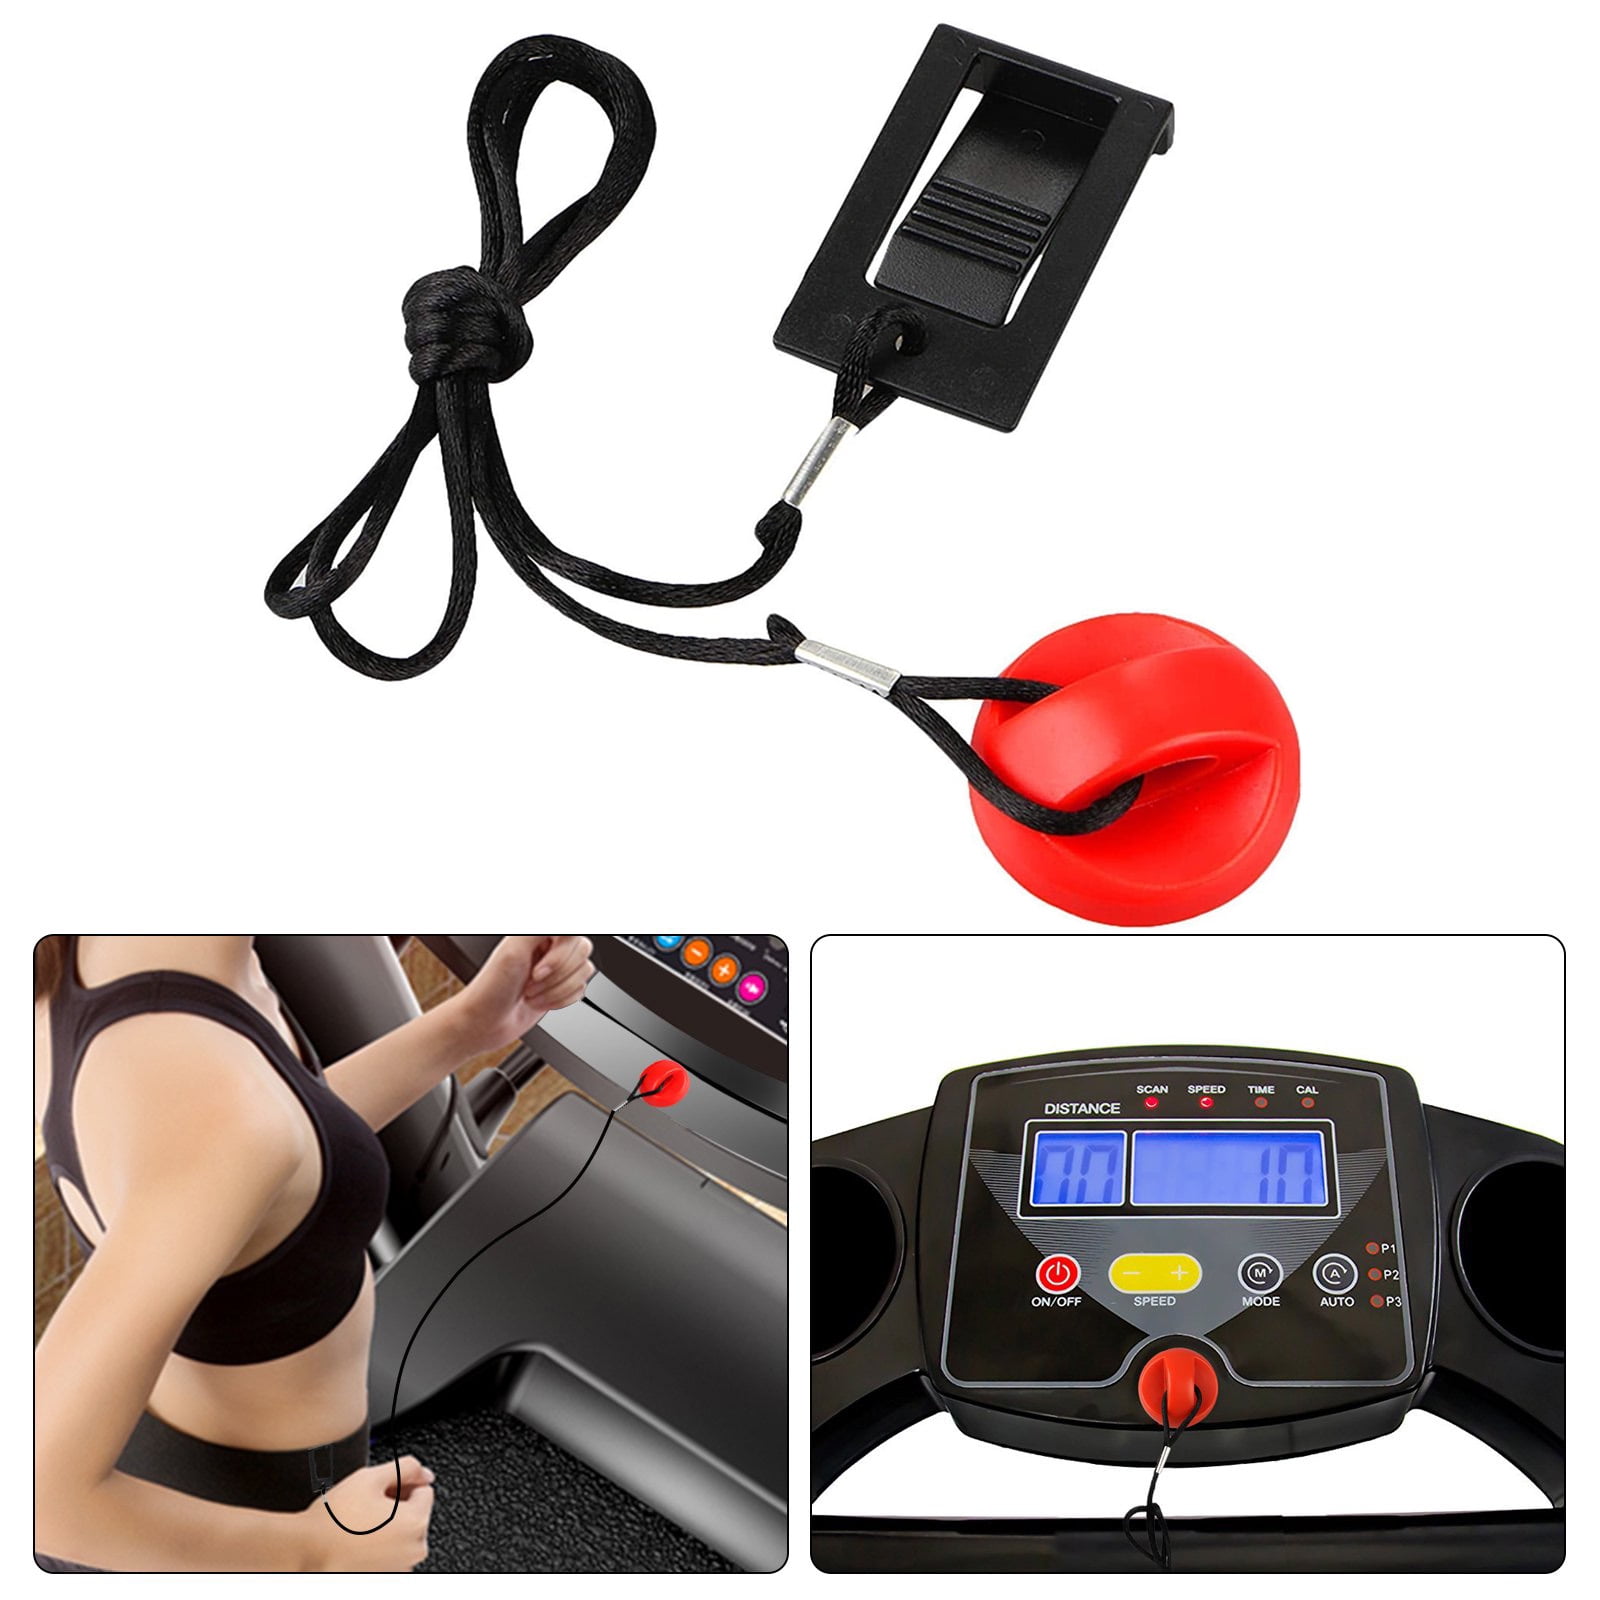 Q6M5 Running Machine Safety Key Treadmill Magnetic Switch Lock Fitness Red H2C2 